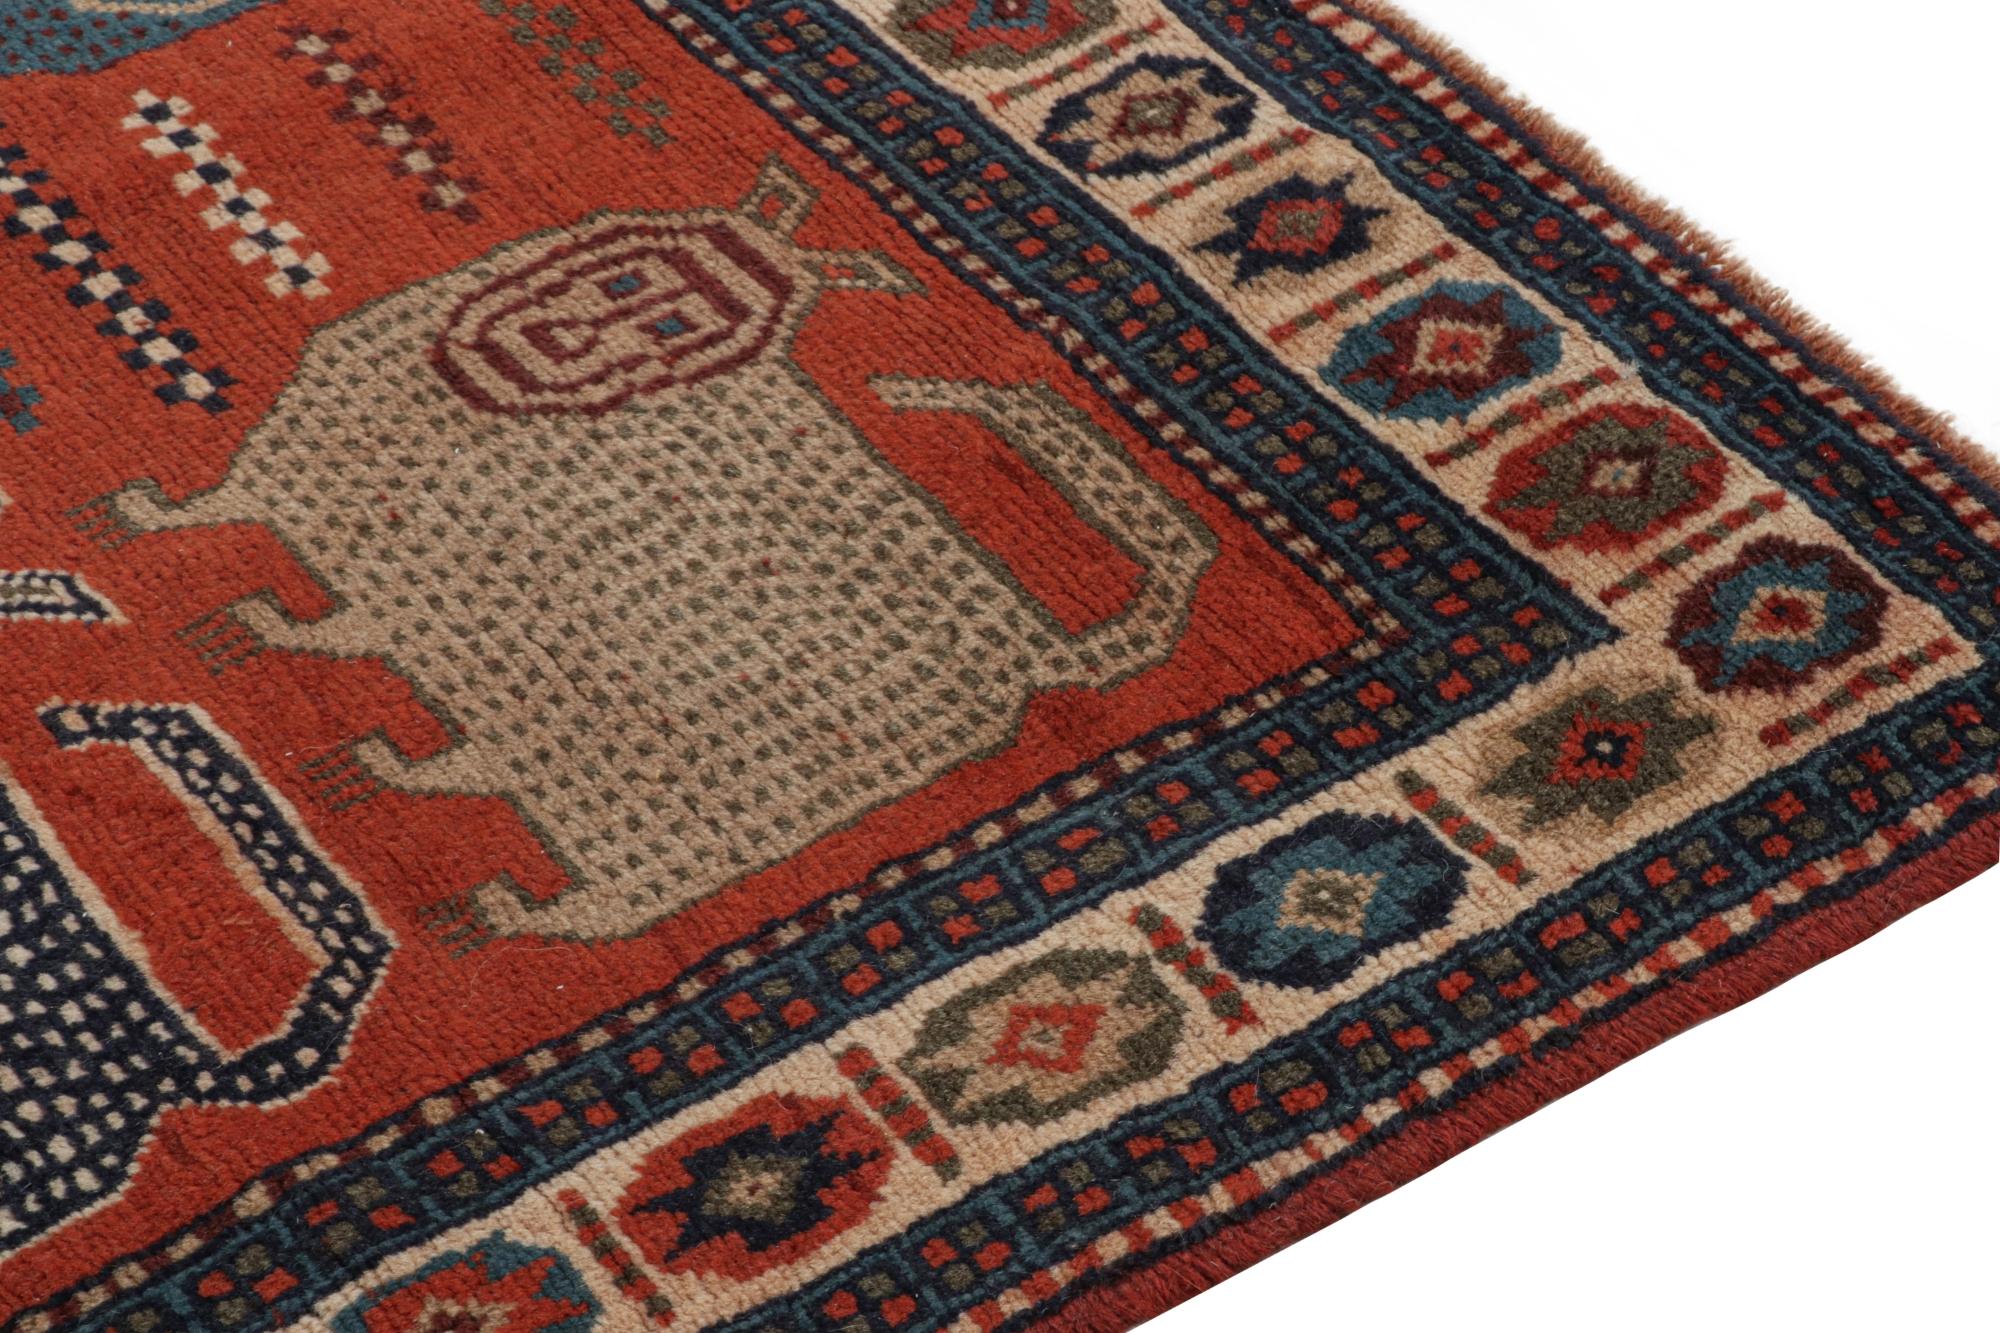 Rare Vintage Tribal Rug in Red with Beige and Blue Pictorials by Rug & Kilim In Good Condition For Sale In Long Island City, NY